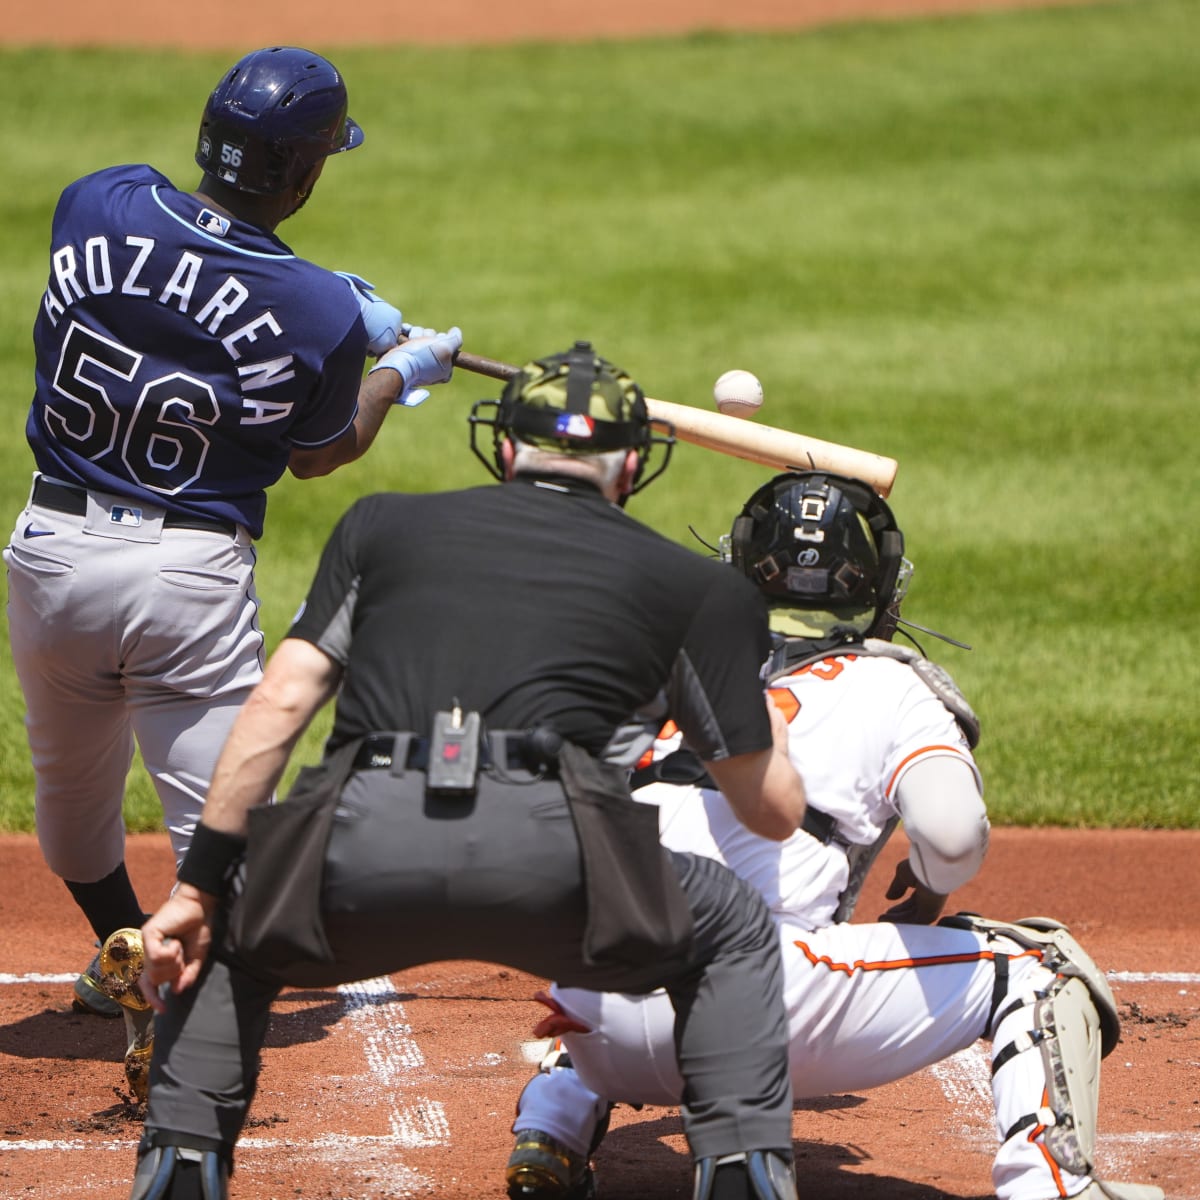 Tampa Bay Rays 2022 Major League Baseball Schedule With Dates, Locations  and Game Times - Sports Illustrated Tampa Bay Rays Scoop News, Analysis and  More